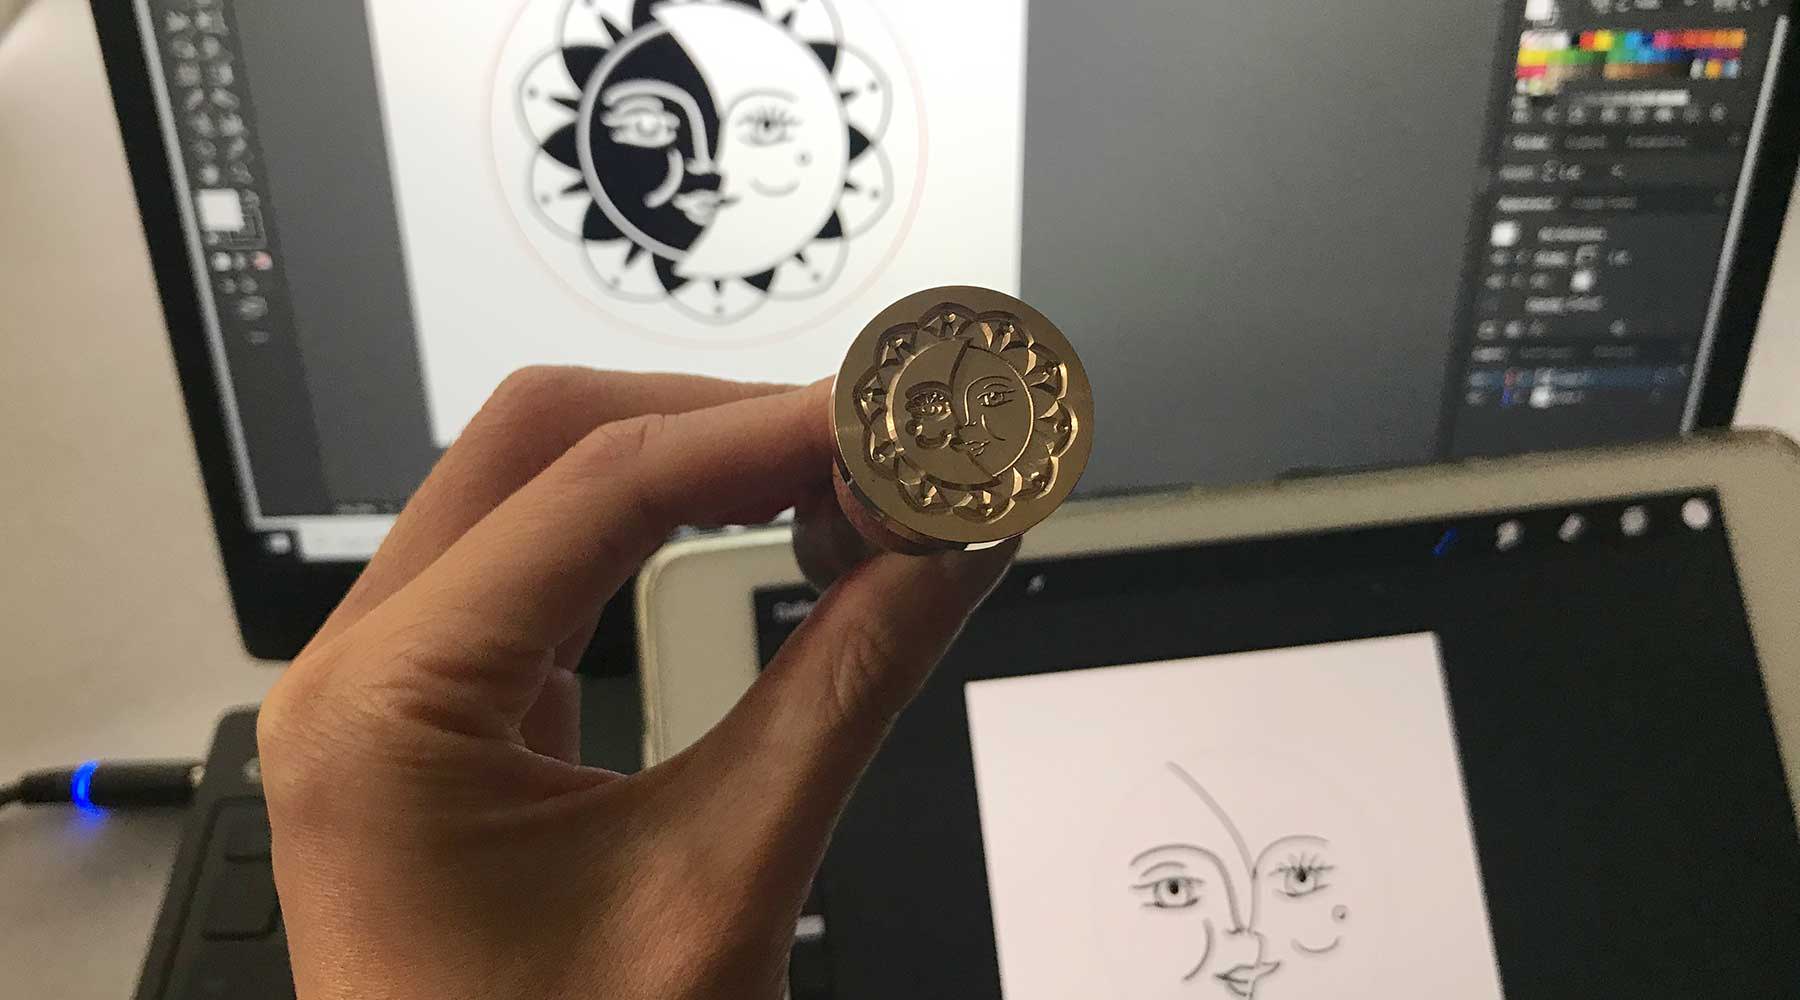 Behind The Scenes: Designing a wax seal stamp